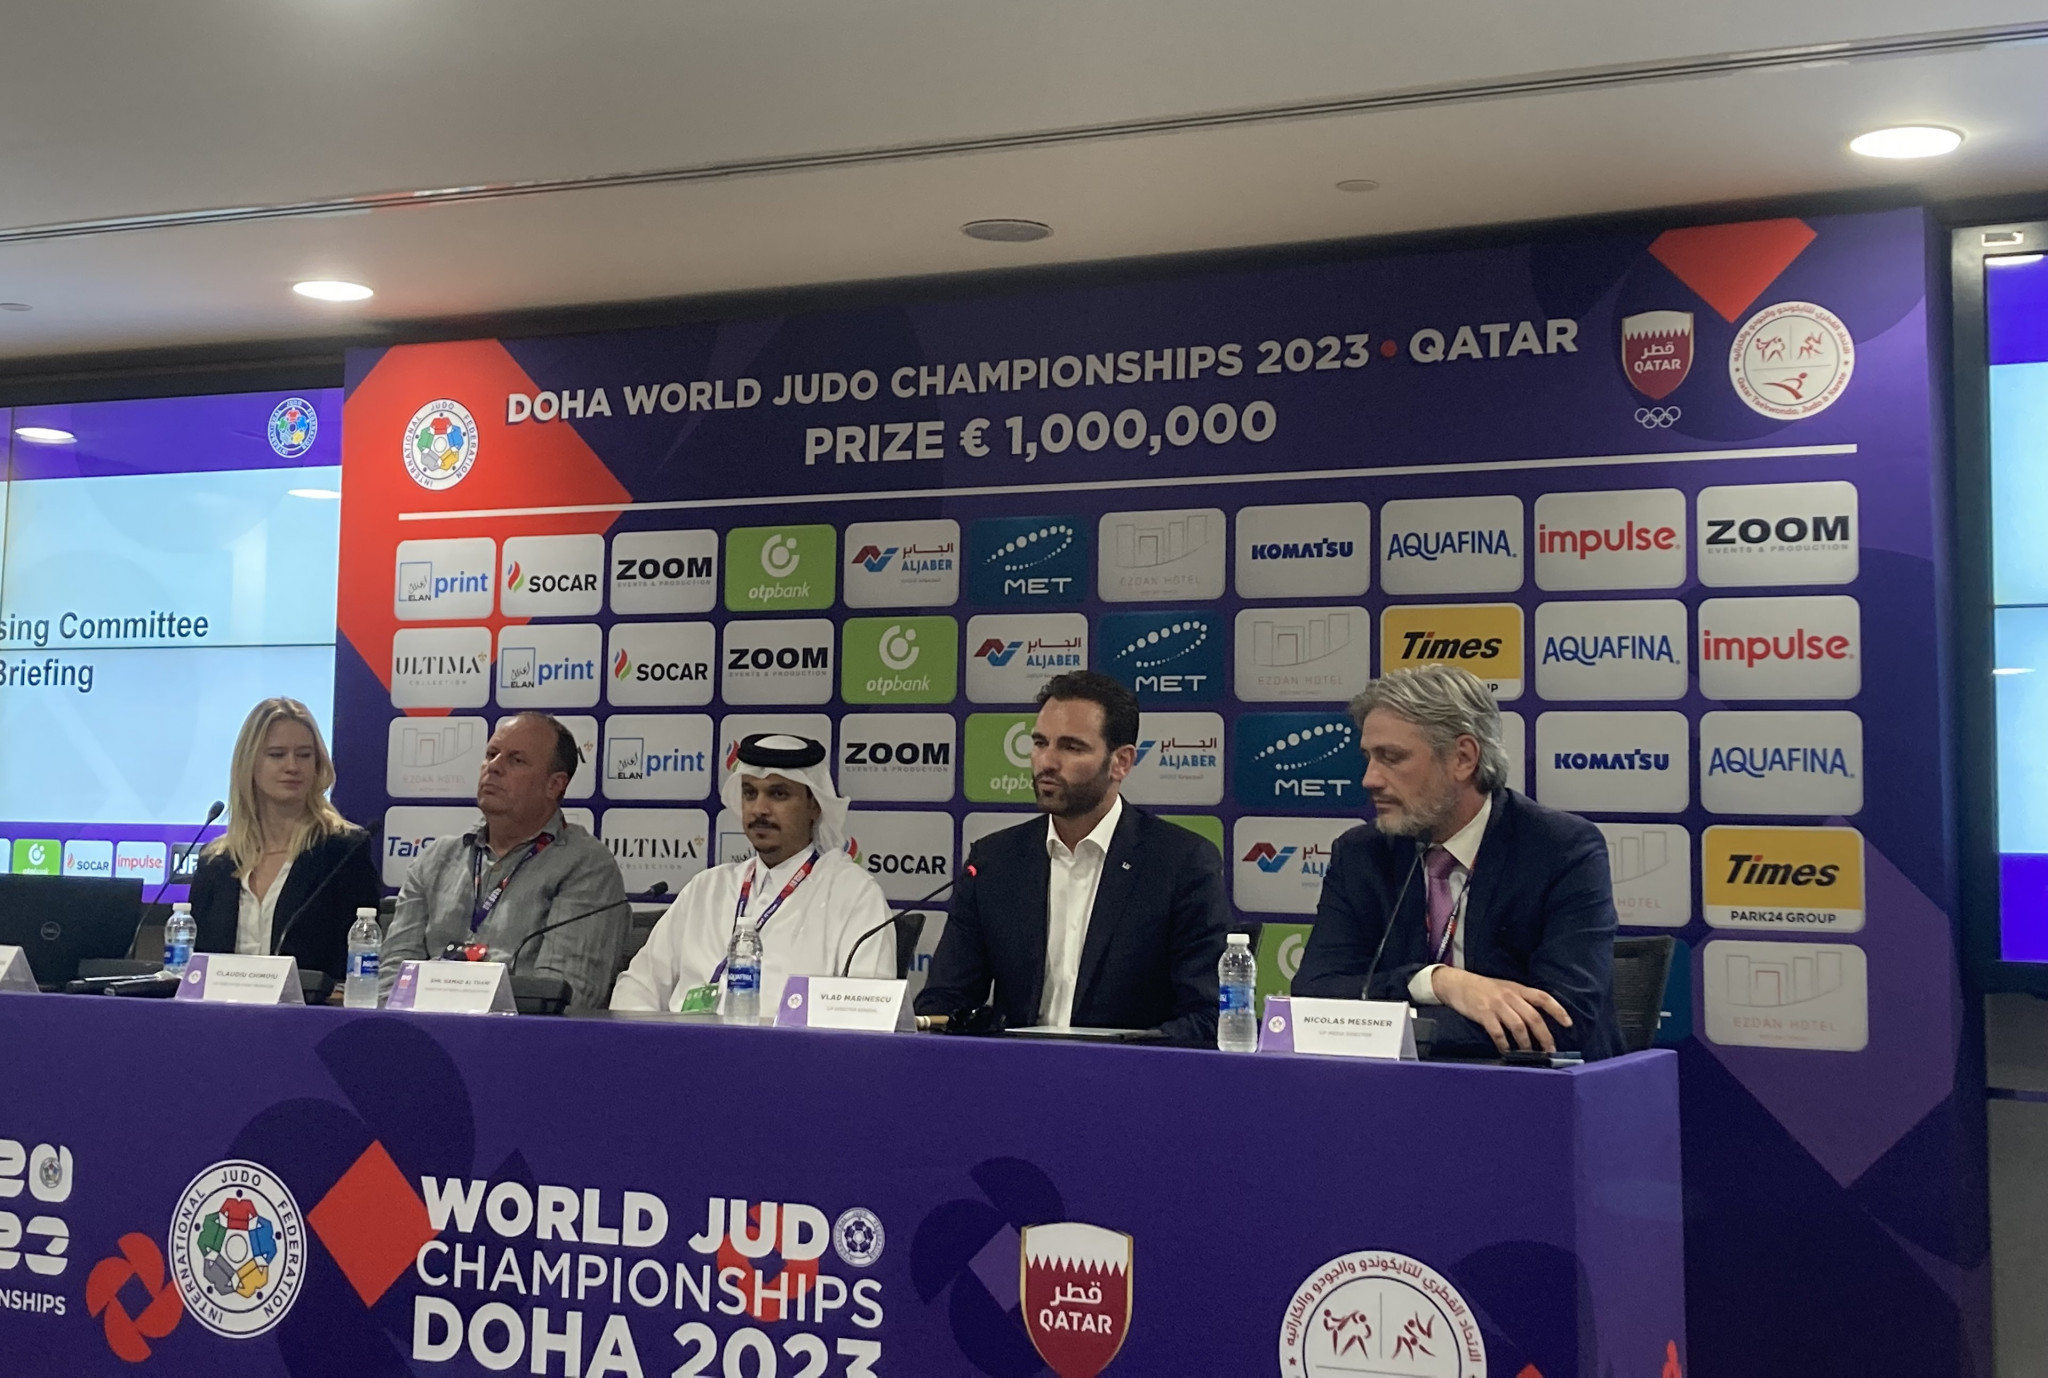 Marinescu claims "unfair" to stop Russian judoka from qualifying for Paris 2024